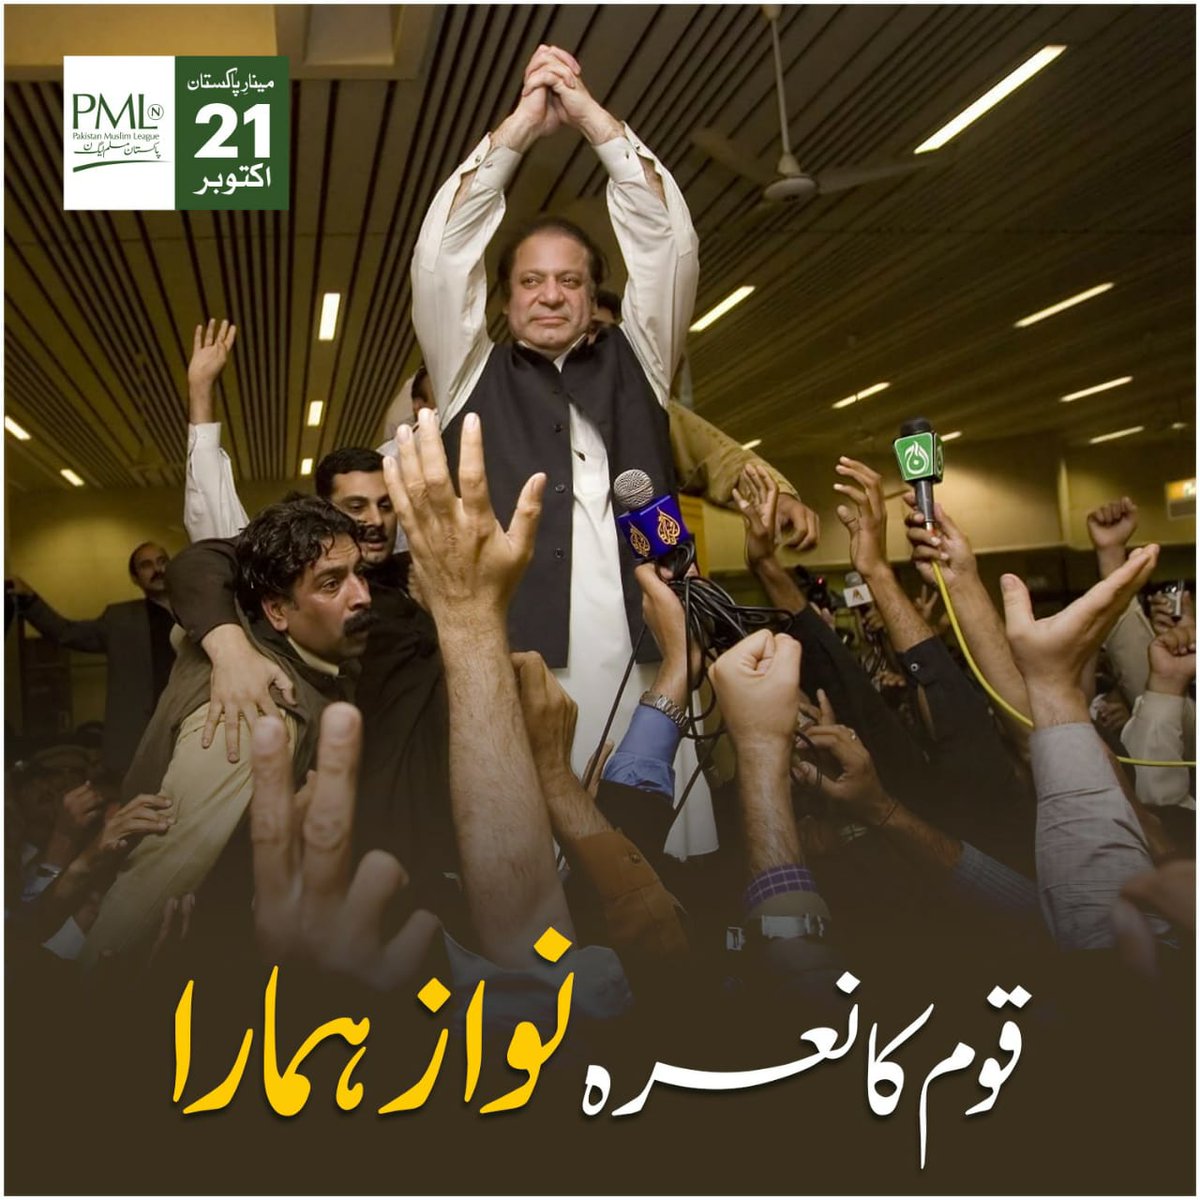 Mohsin Pakistan, who brings fresh energy and ideas to our beloved nation. Together, we aim to make a brighter and better Pakistan! #ویلکم_محسن_پاکستان #روشن_پاکستان_کی_امید_نوازشریف